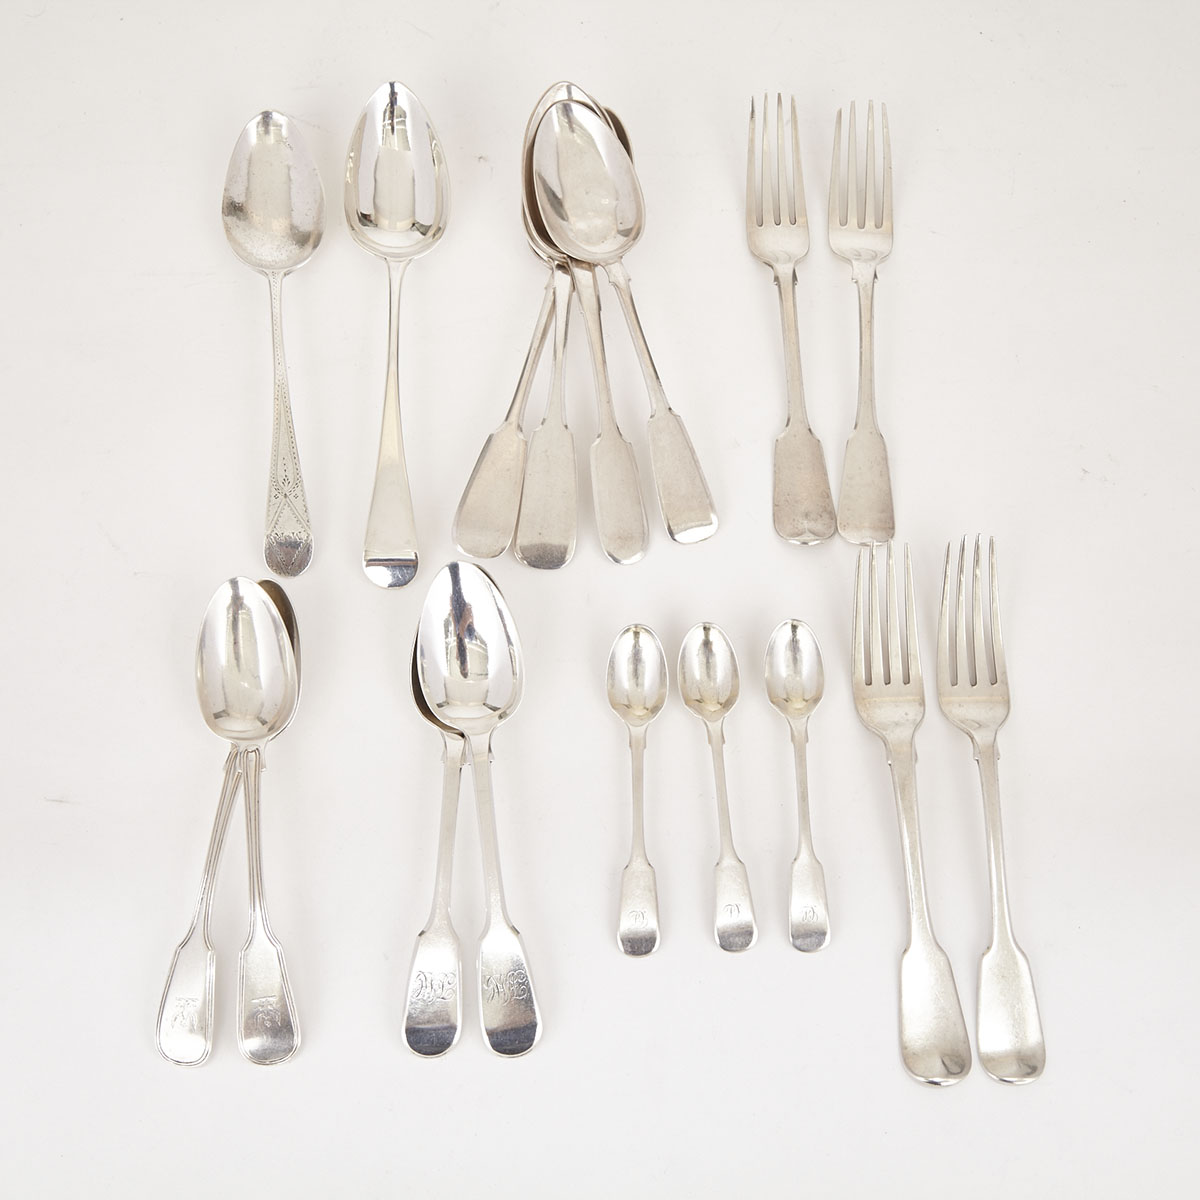 Grouped Lot of George III and Later Silver Flatware, some Russian, late 18th/19th century